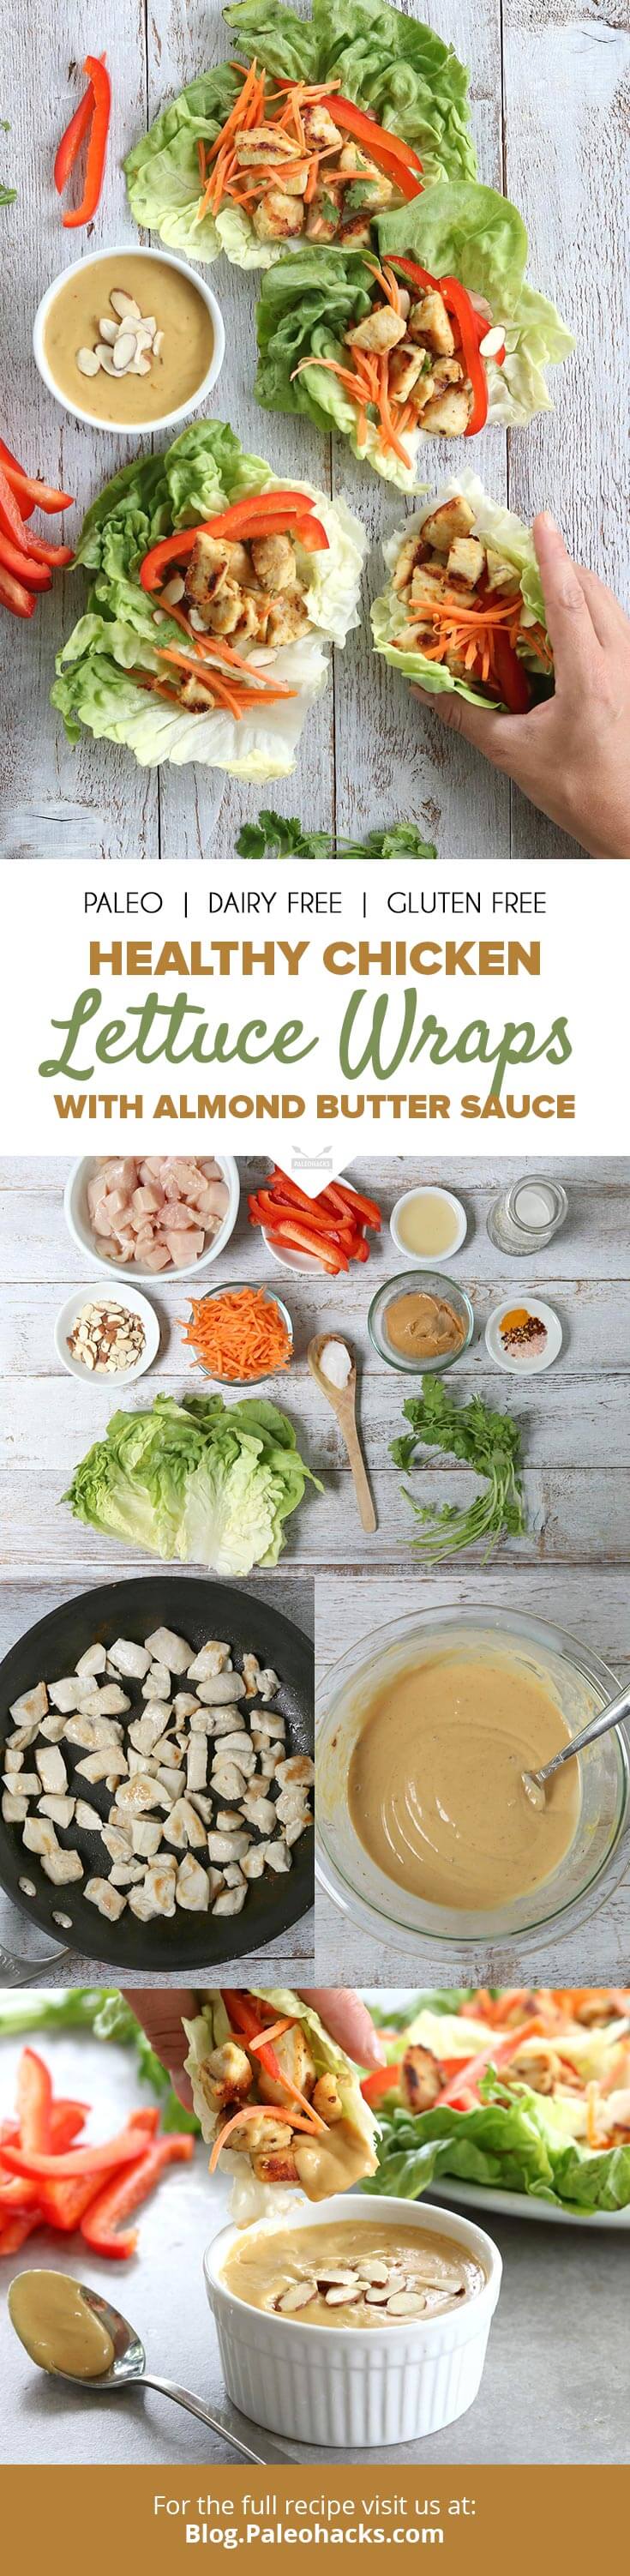 No need to call for takeout—these healthy chicken lettuce wraps are made with a creamy almond butter sauce for big flavor with way less sodium.